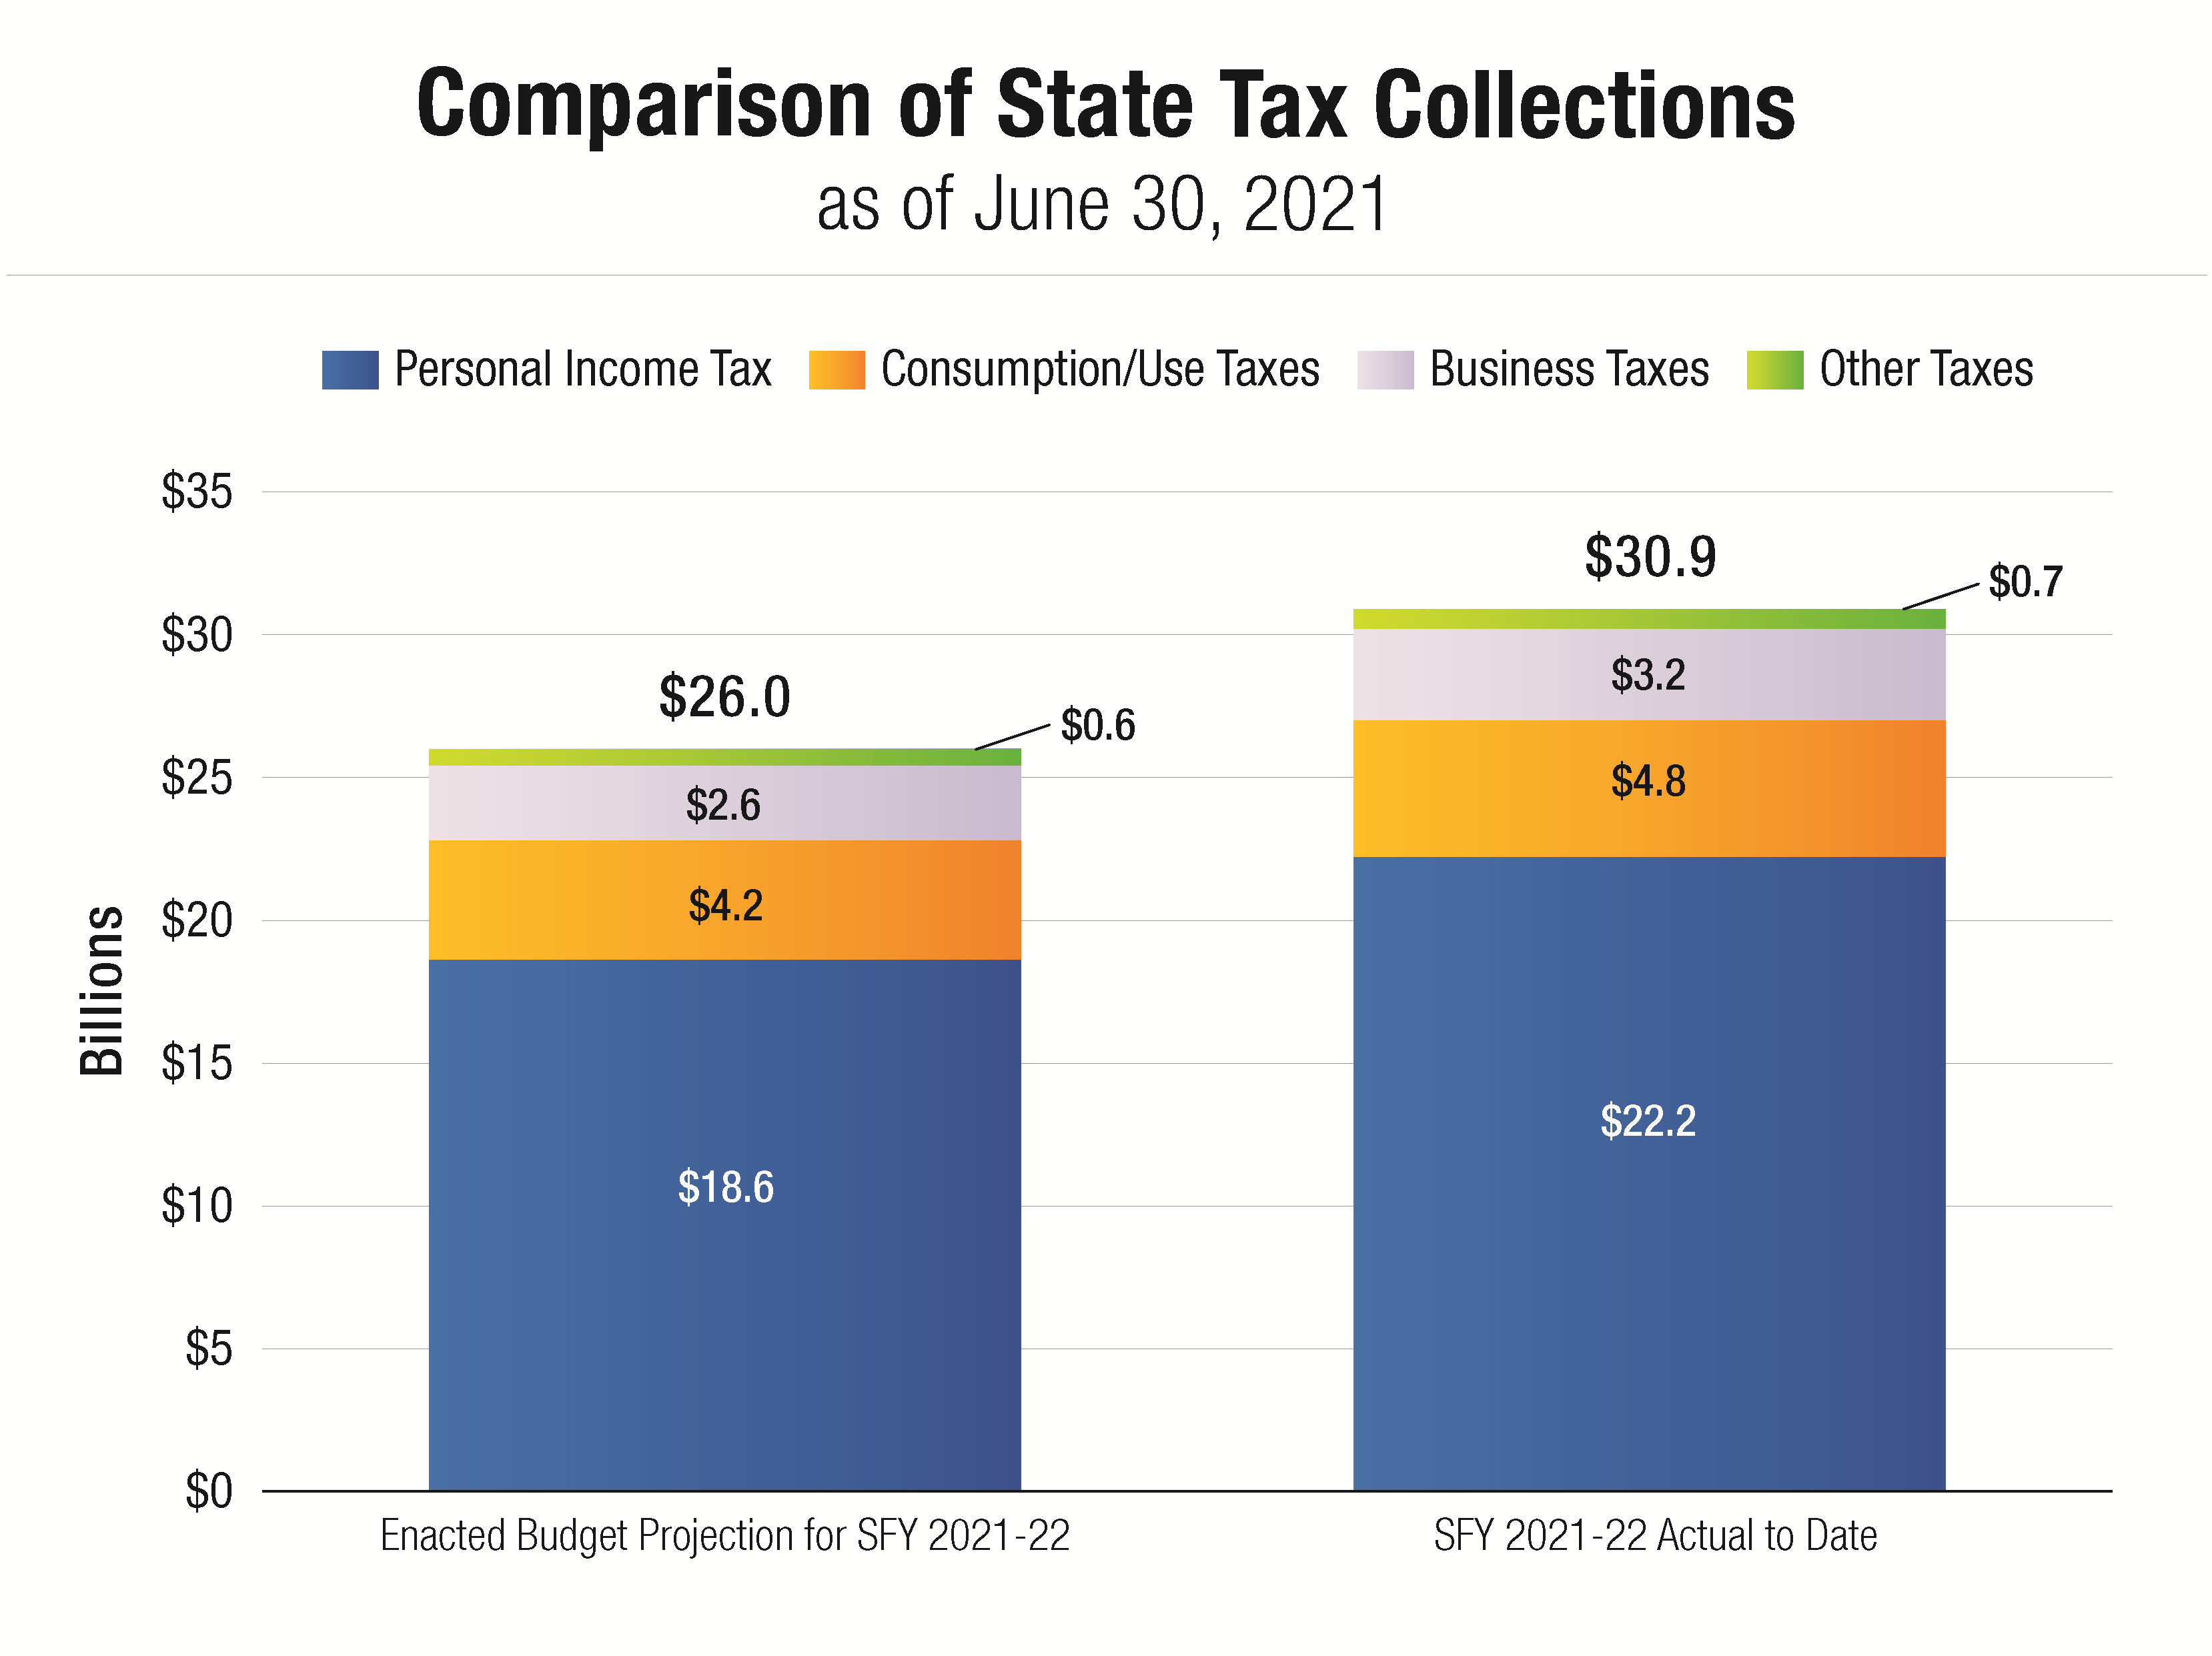 Comparison of State Tax Collections - July 2021